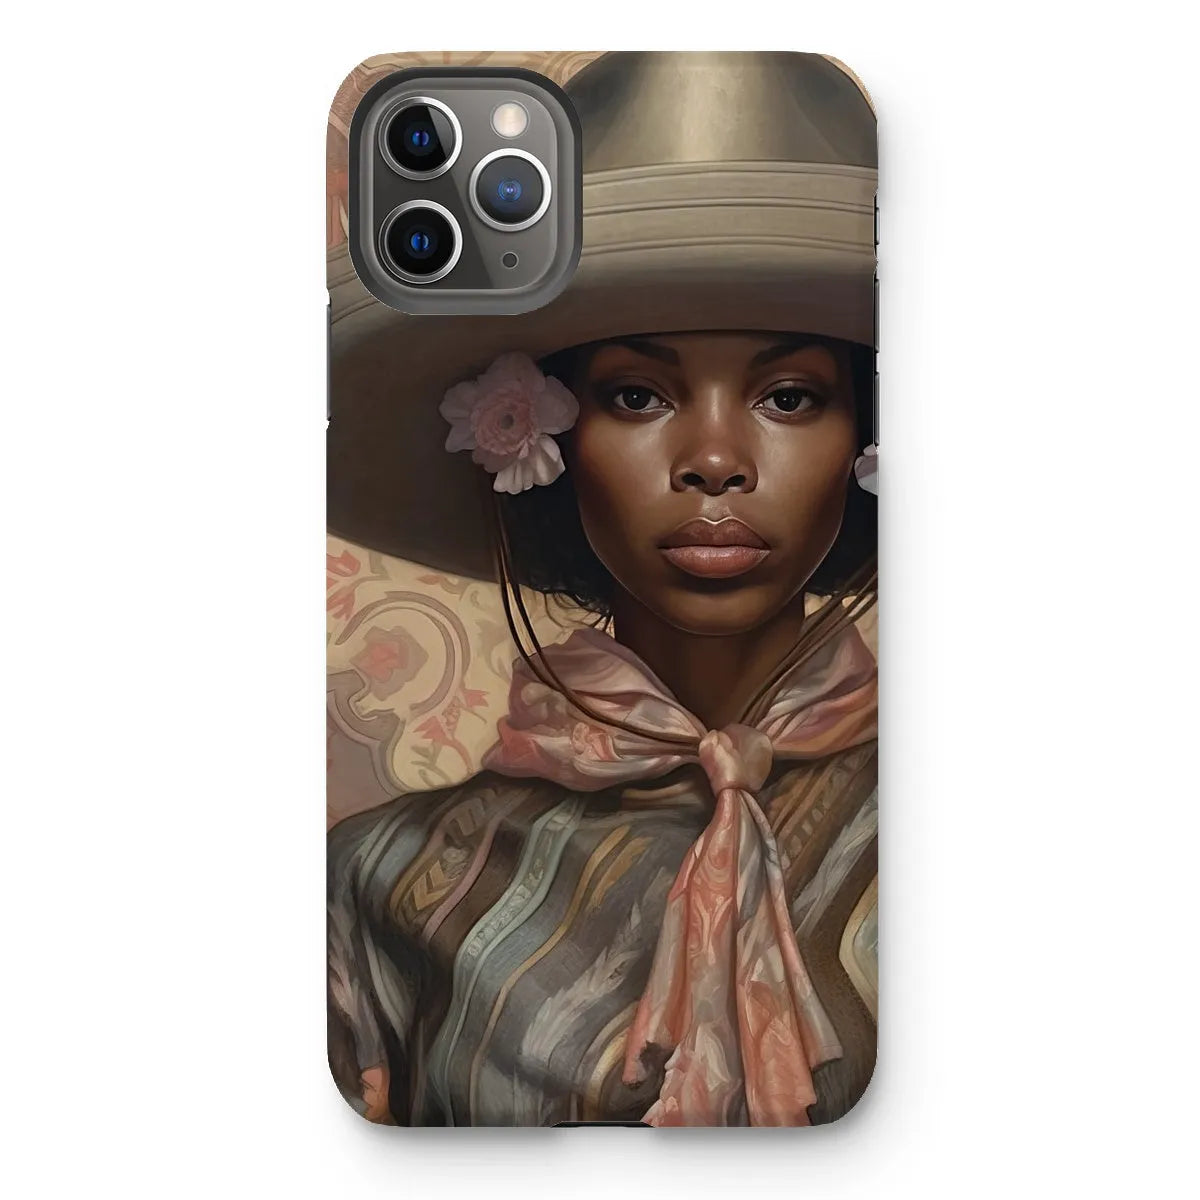 Sadie The Lesbian Cowgirl - Sapphic Art Phone Case - Iphone 11 Pro Max / Matte - Mobile Phone Cases - Aesthetic Art